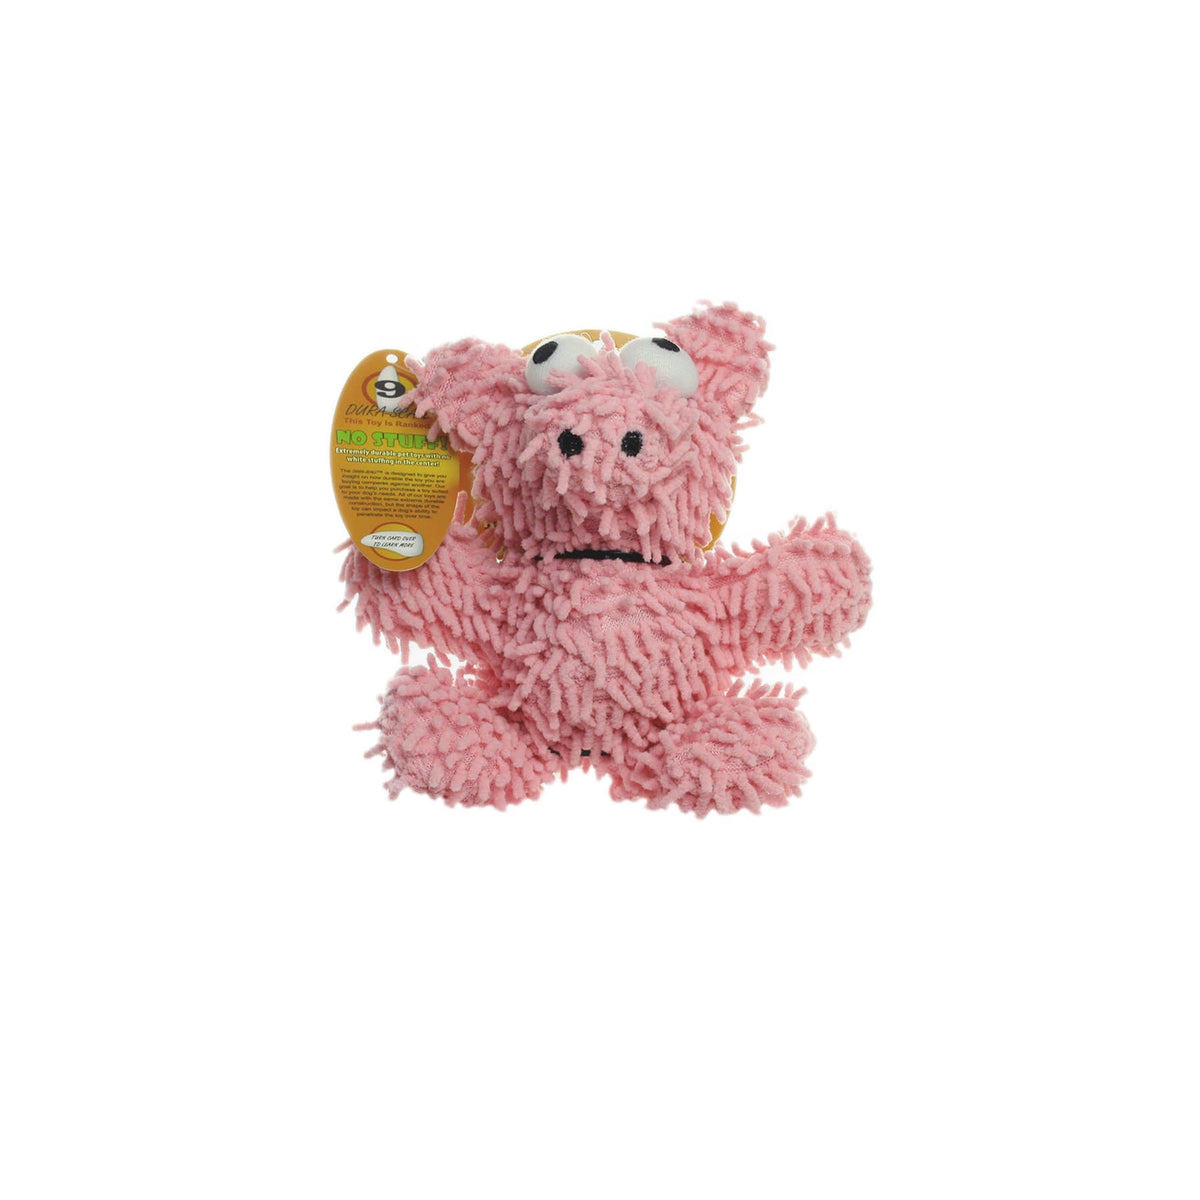 Mighty Microfiber Ball - Pig Tough Toy